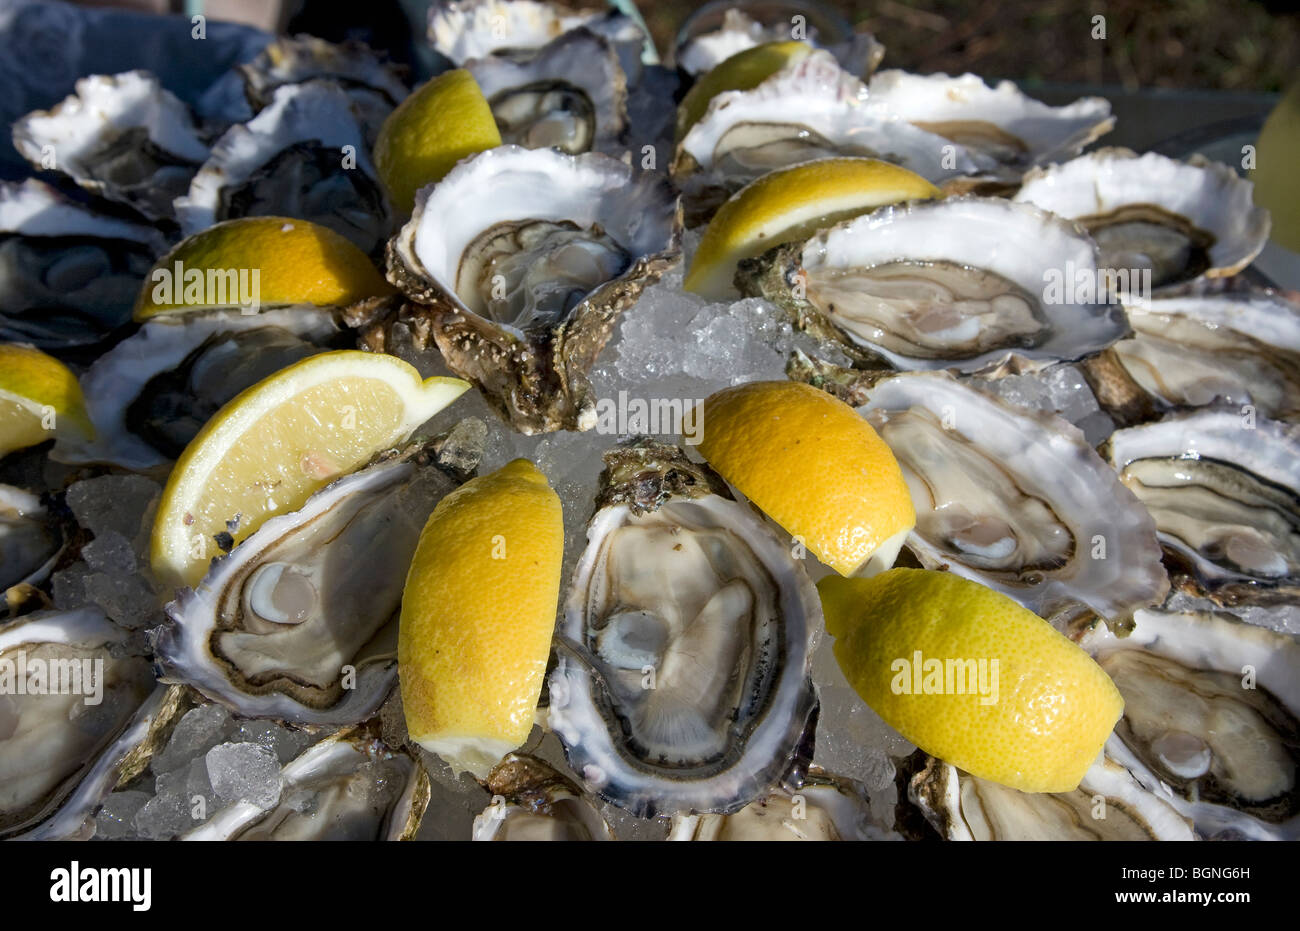 A dish of prepared oysters Stock Photo